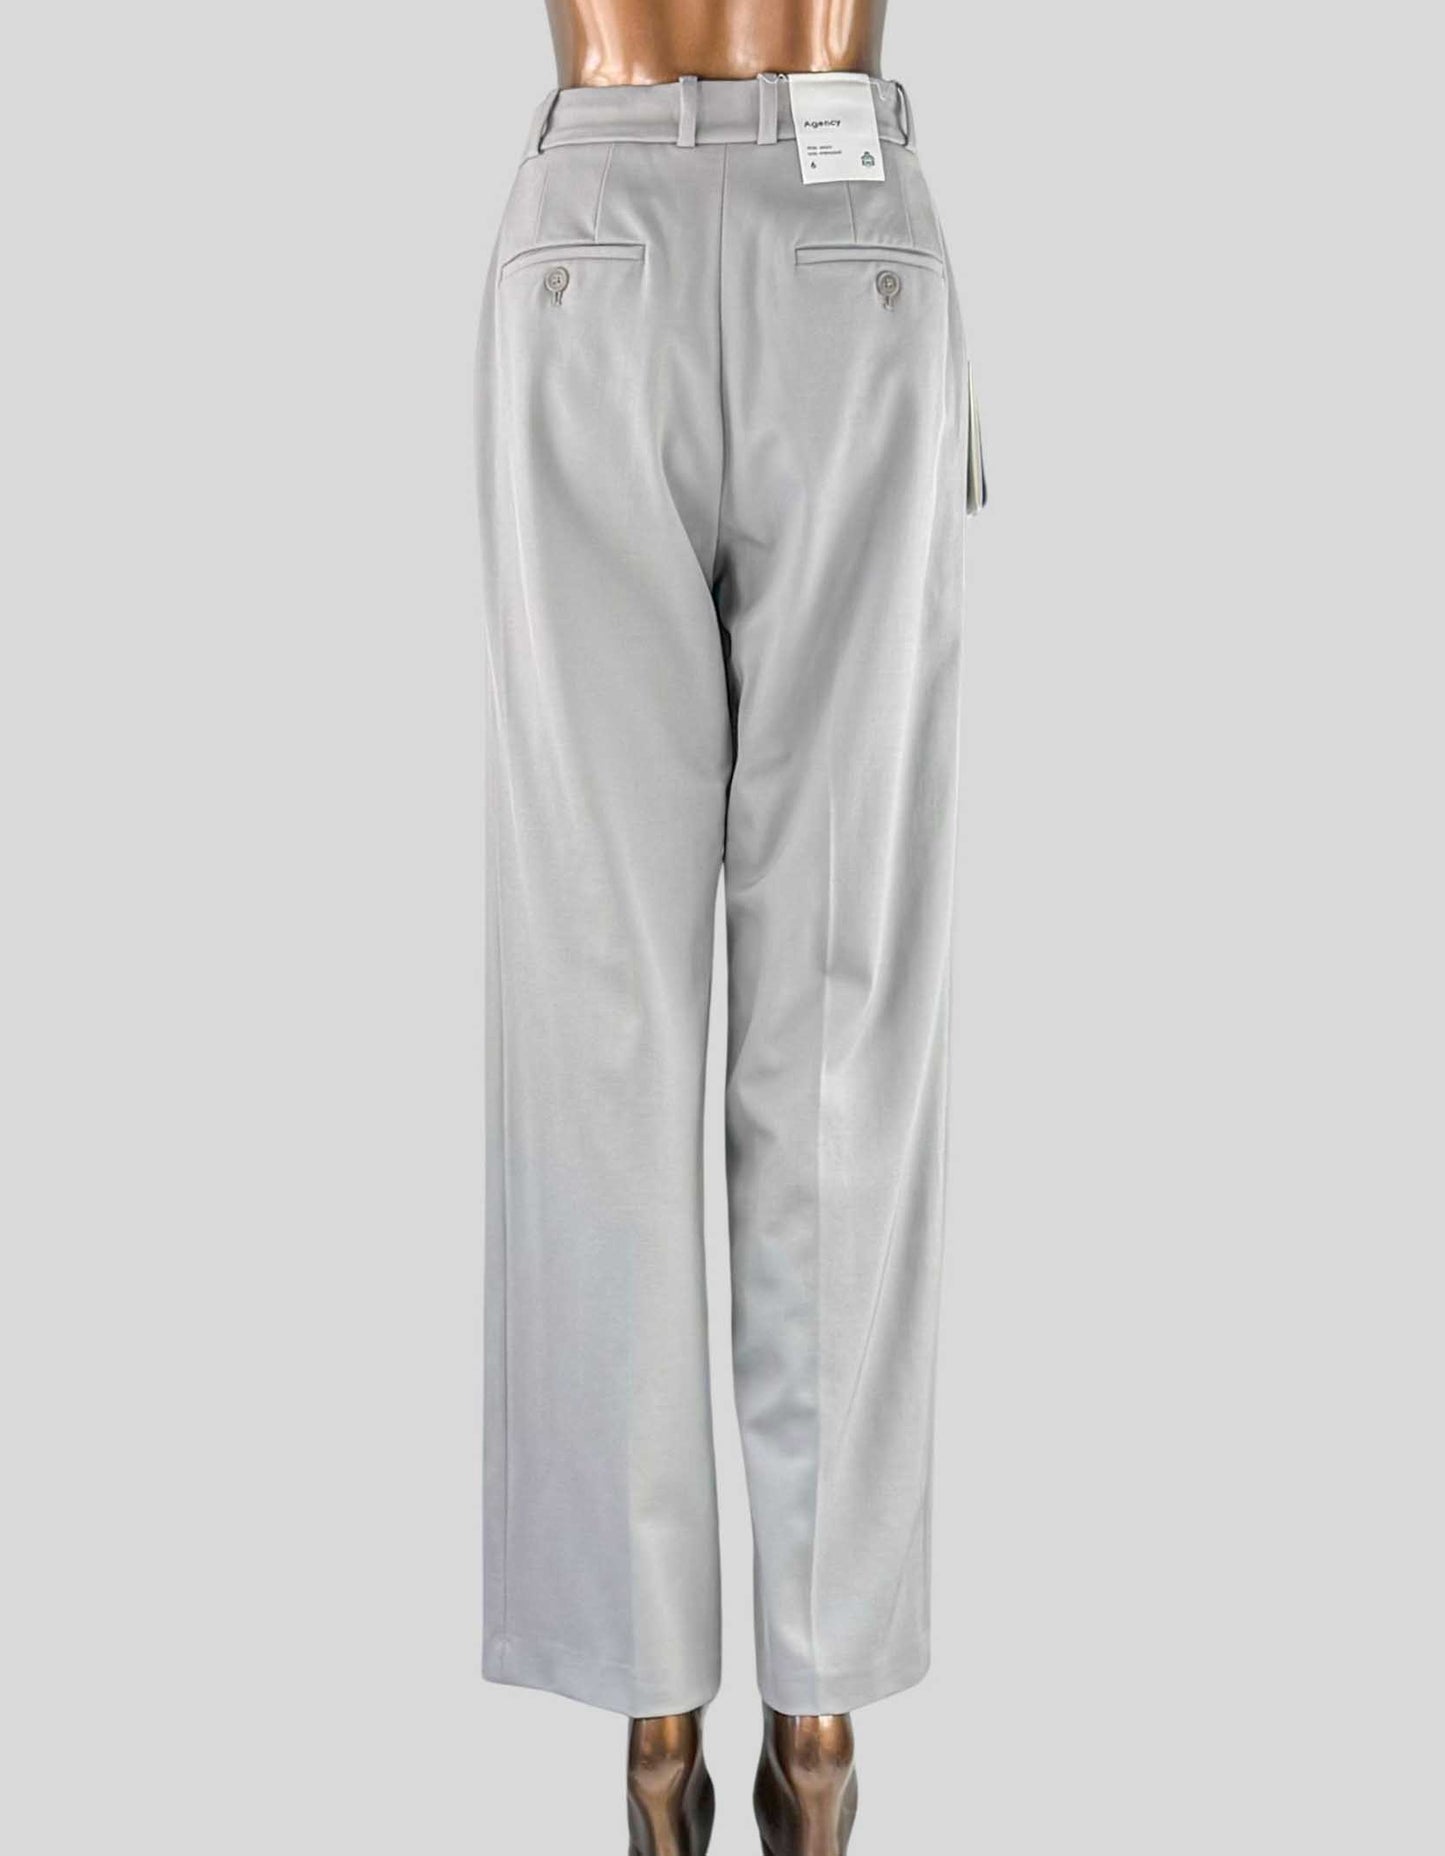 BABATON high-waisted trousers w/ Tags - 6 US